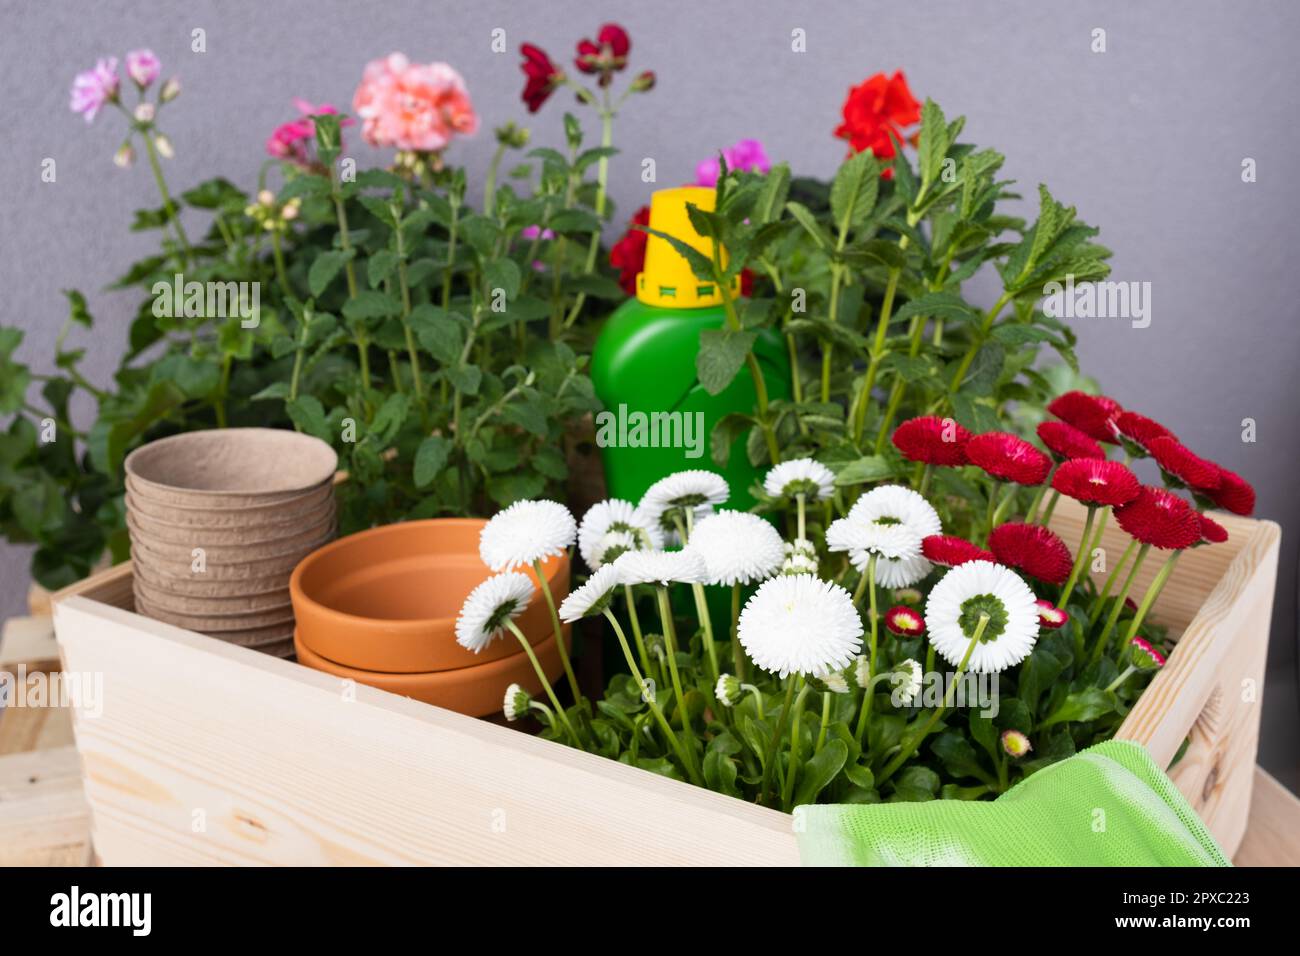 Flower pots for small garden, patio or terrace. Seedlings of spring beautiful flowers and gardening tools in a wooden box. Stock Photo